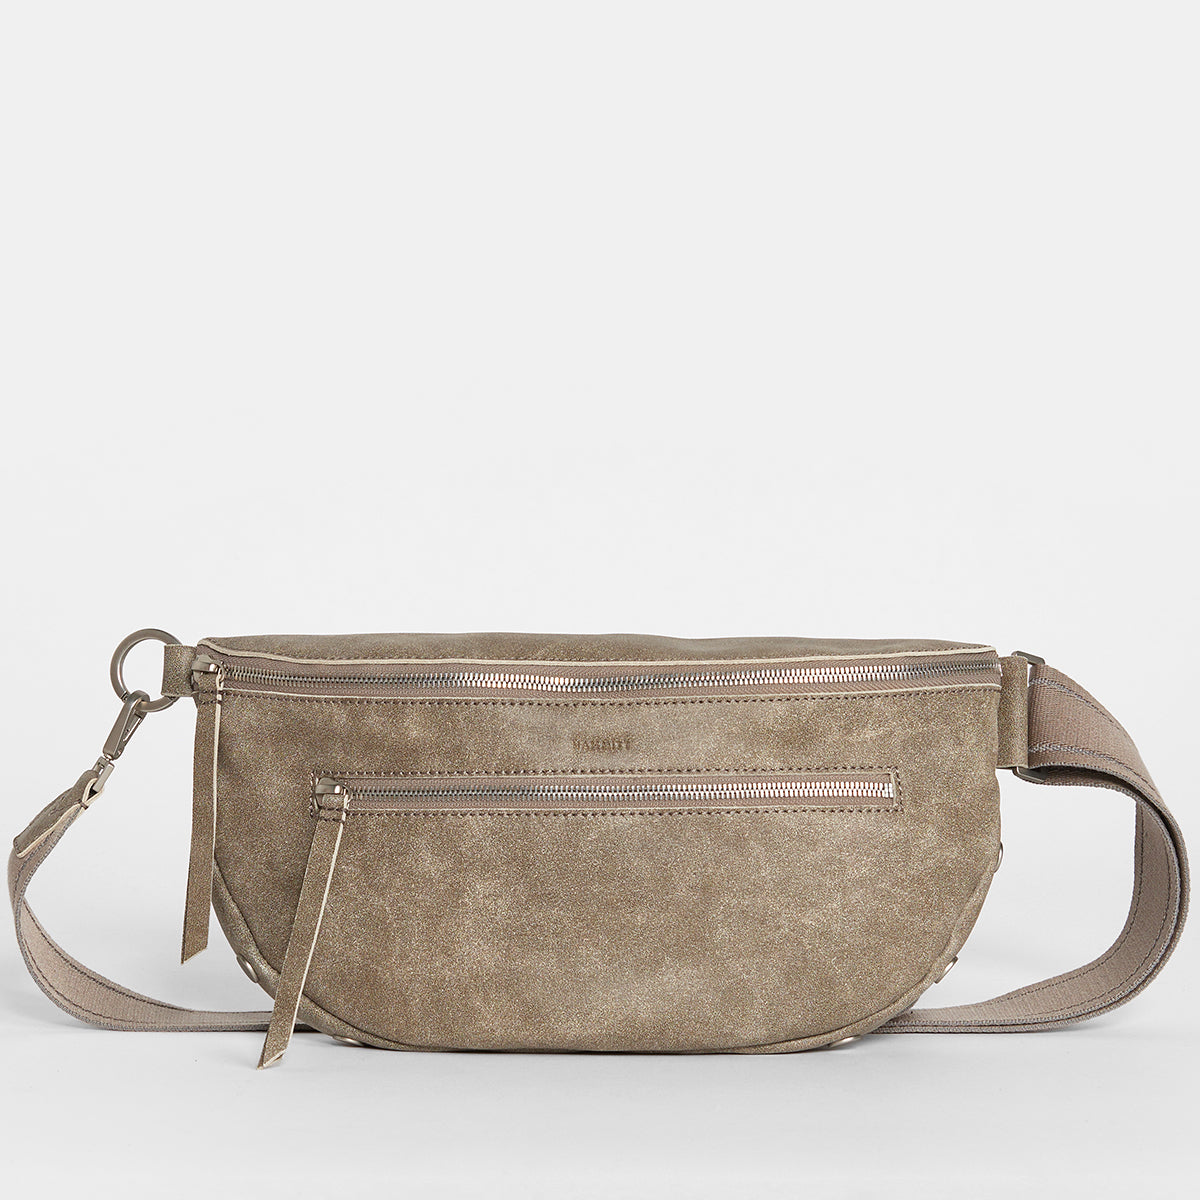 Charles-Crossbody-Lrg-Pewter-BS-Front-View